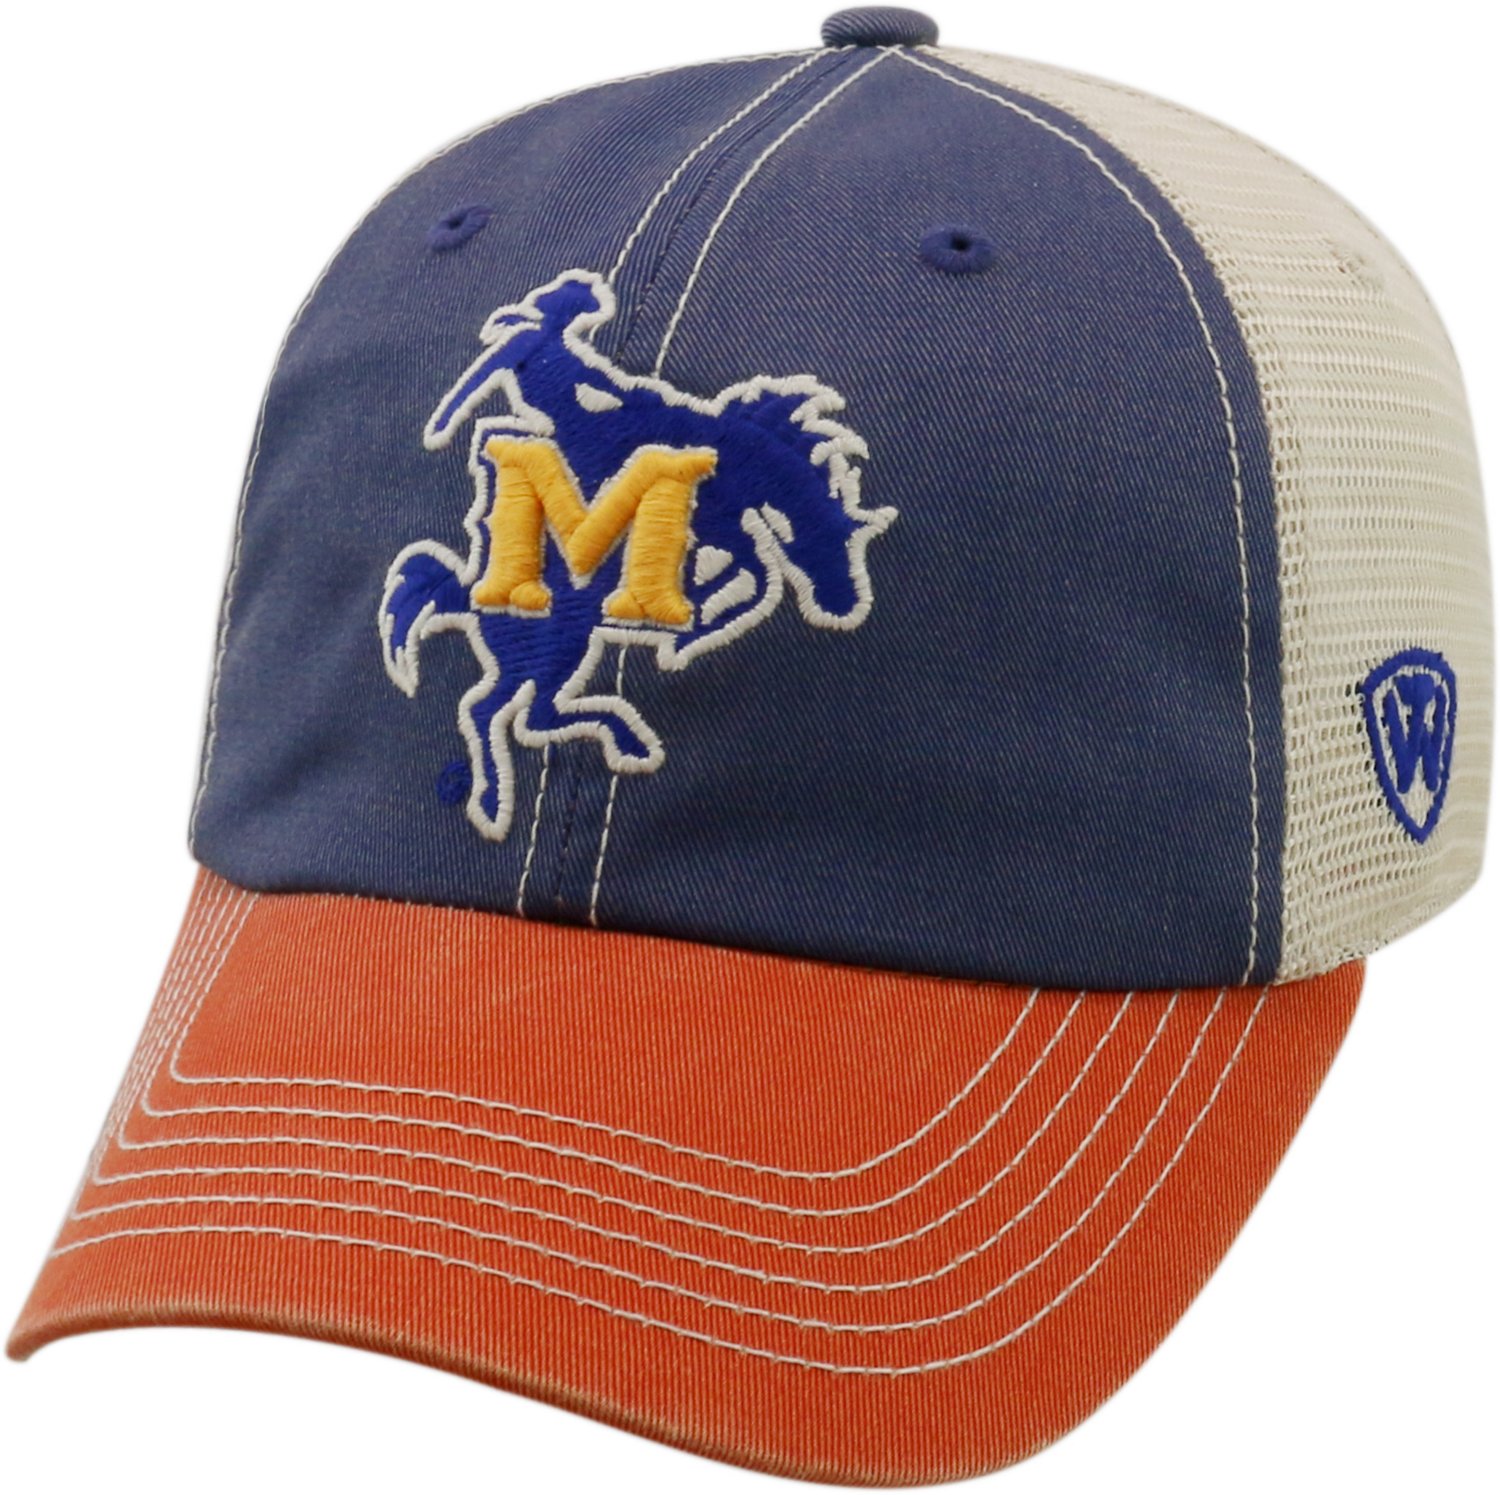 MCNEESE STATE ST COWBOYS BLUE NCAA BEANIE TOP OF THE WORLD KNIT CAP HAT NWT! 